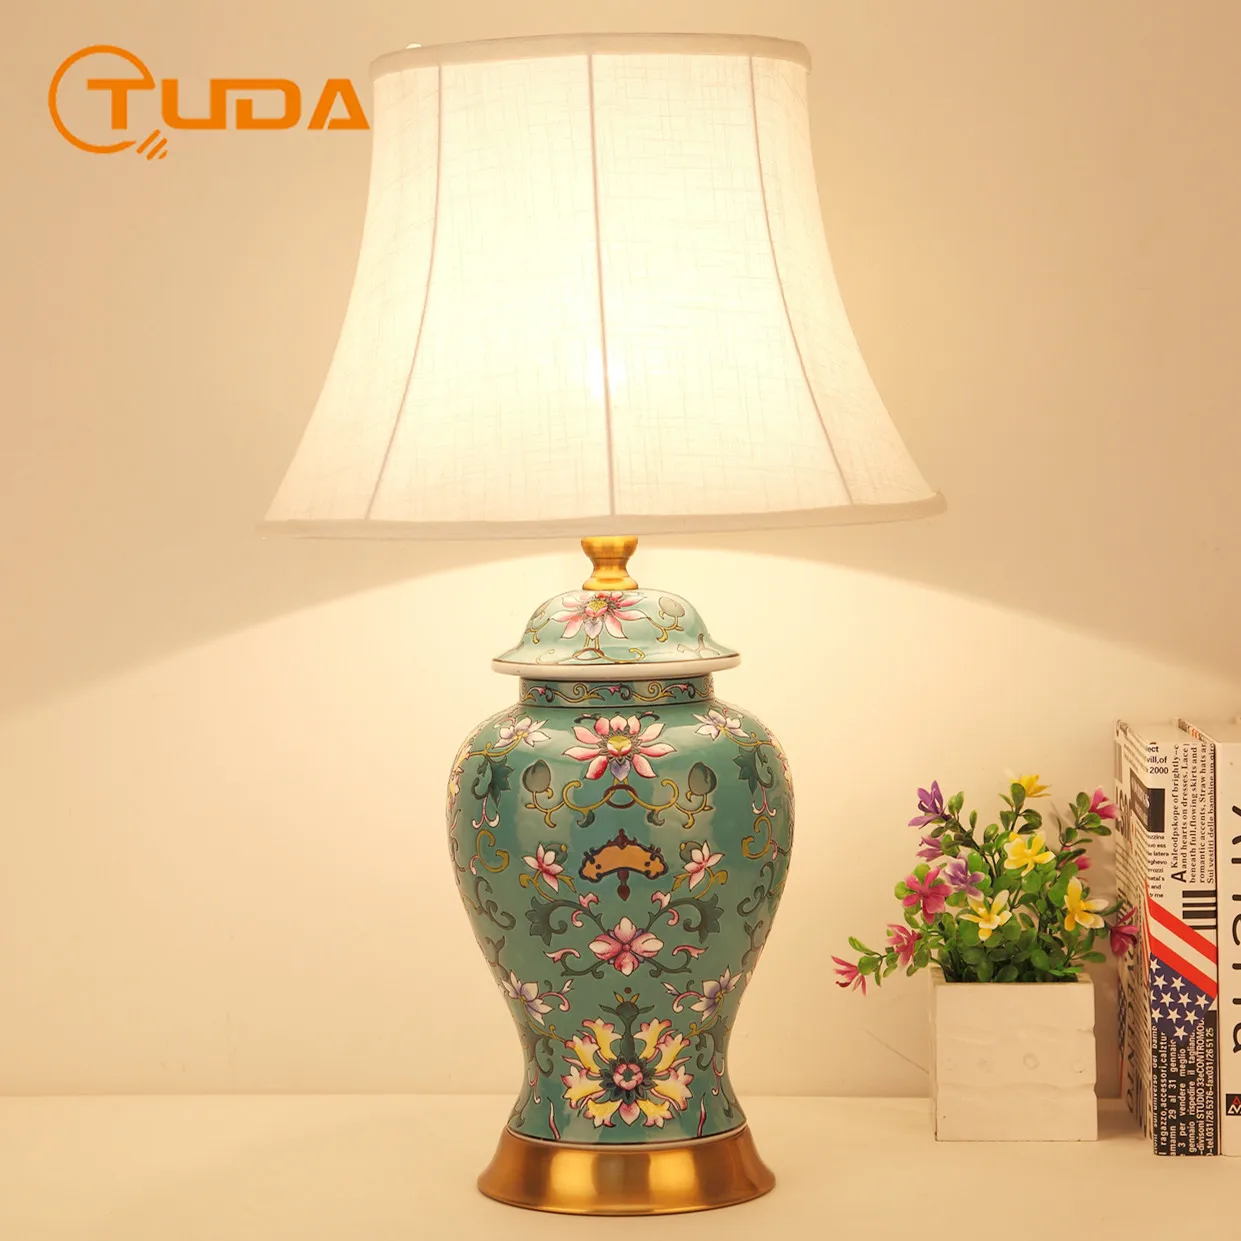 

40x65CM TUDA American Style Chinese Retro Ceramic Table Lamp For Bedroom Living Room Home Decor Study Room Bedroom Bedside Lamp